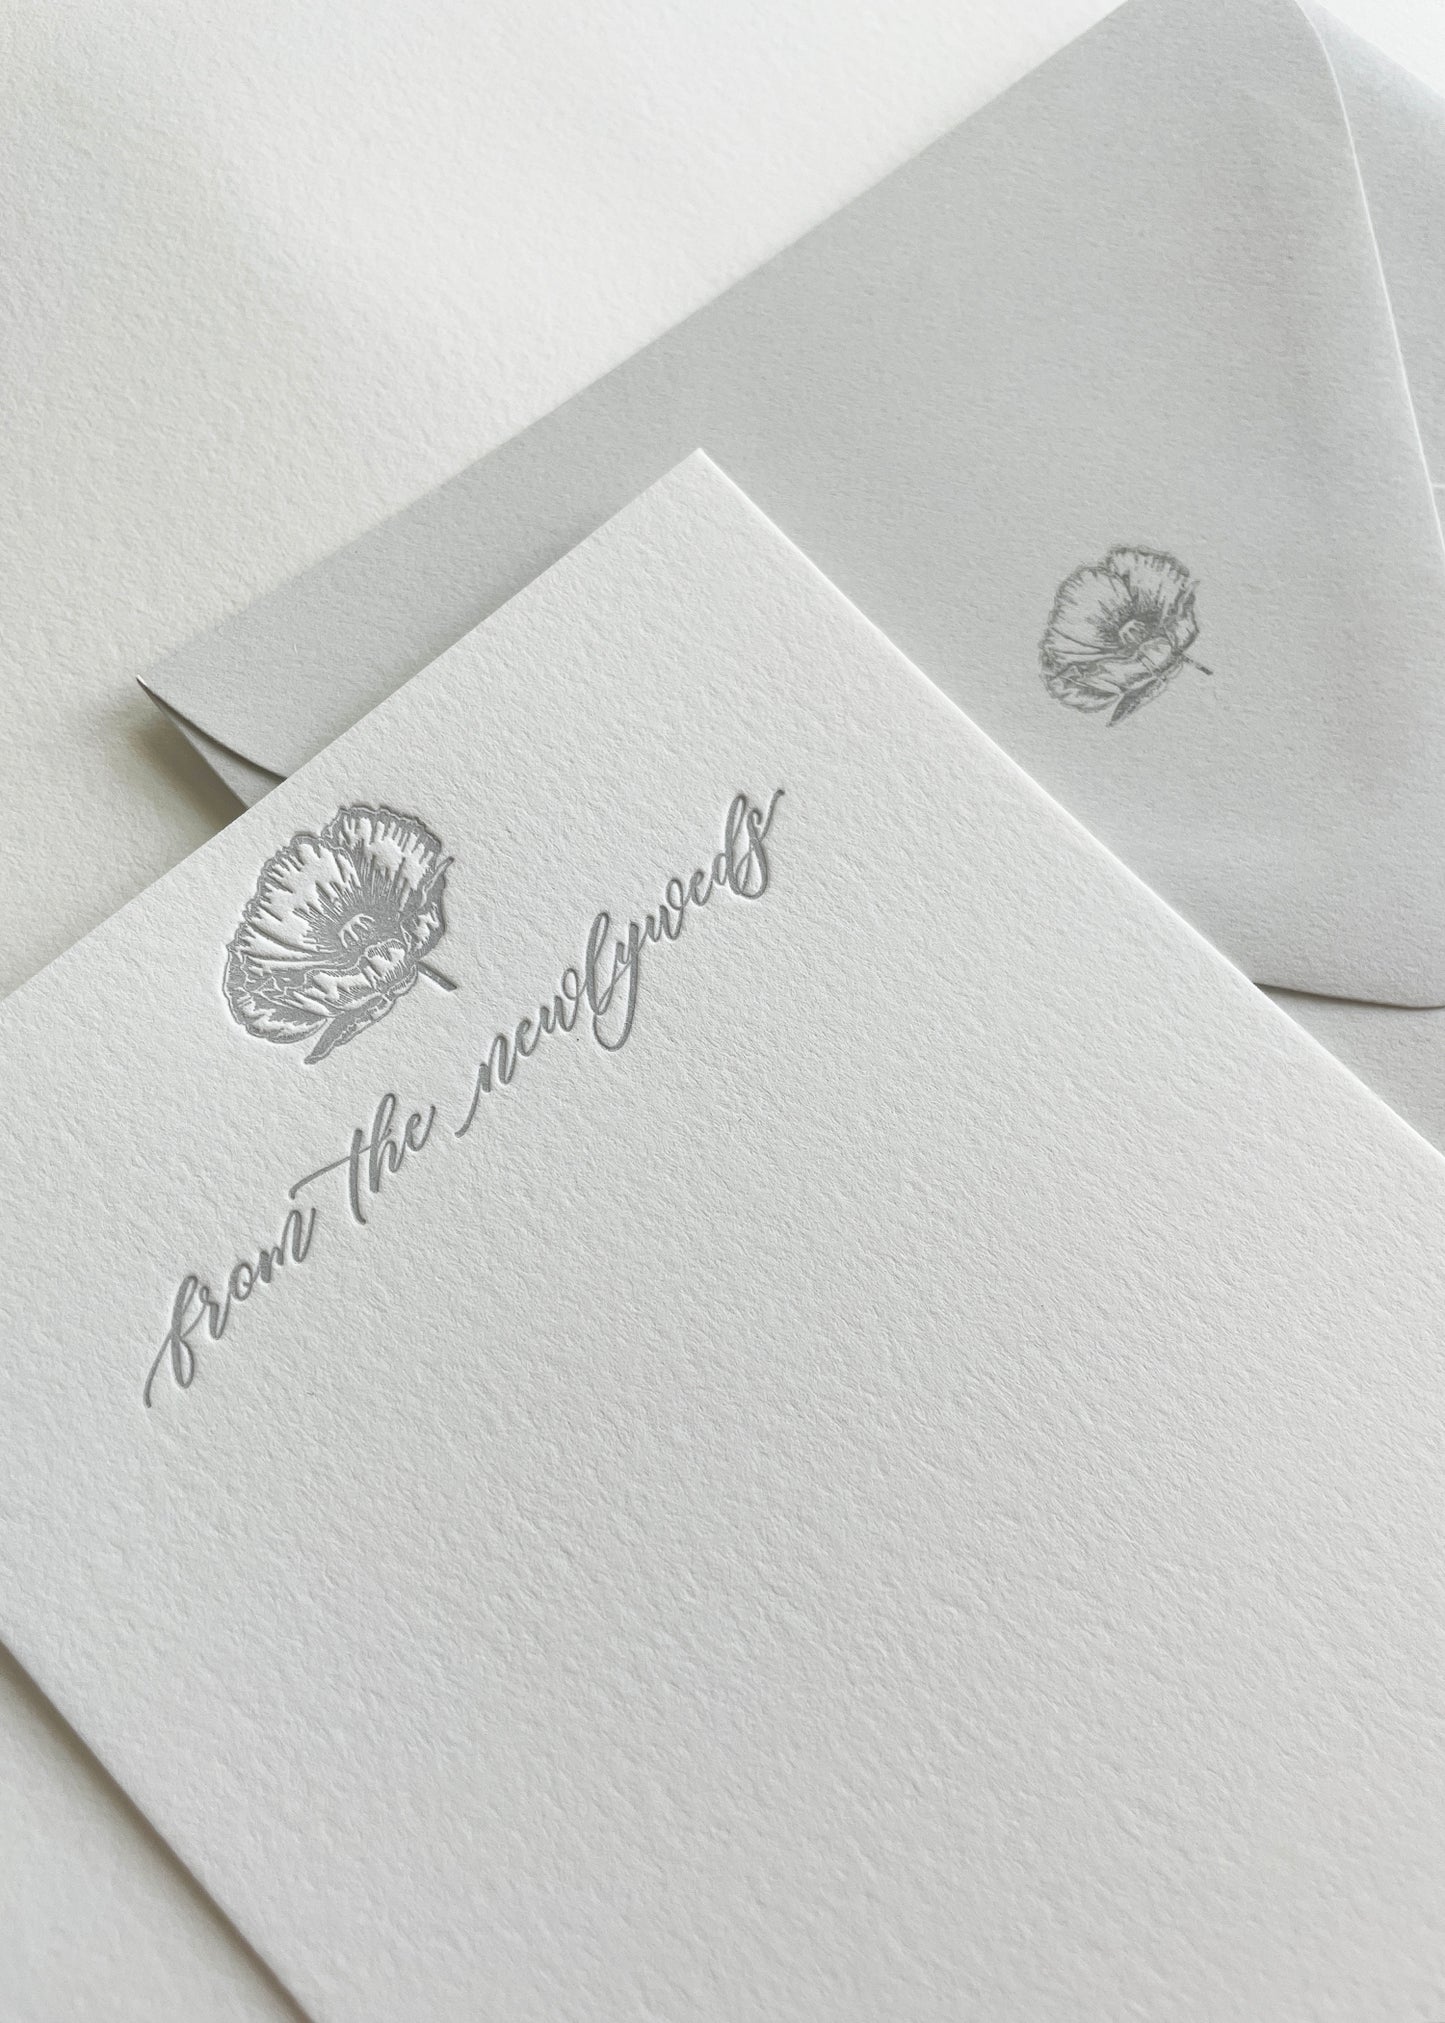 Letterpress flatnote cards with grey cosmo that says "From The Newlyweds" by Rust Belt Love